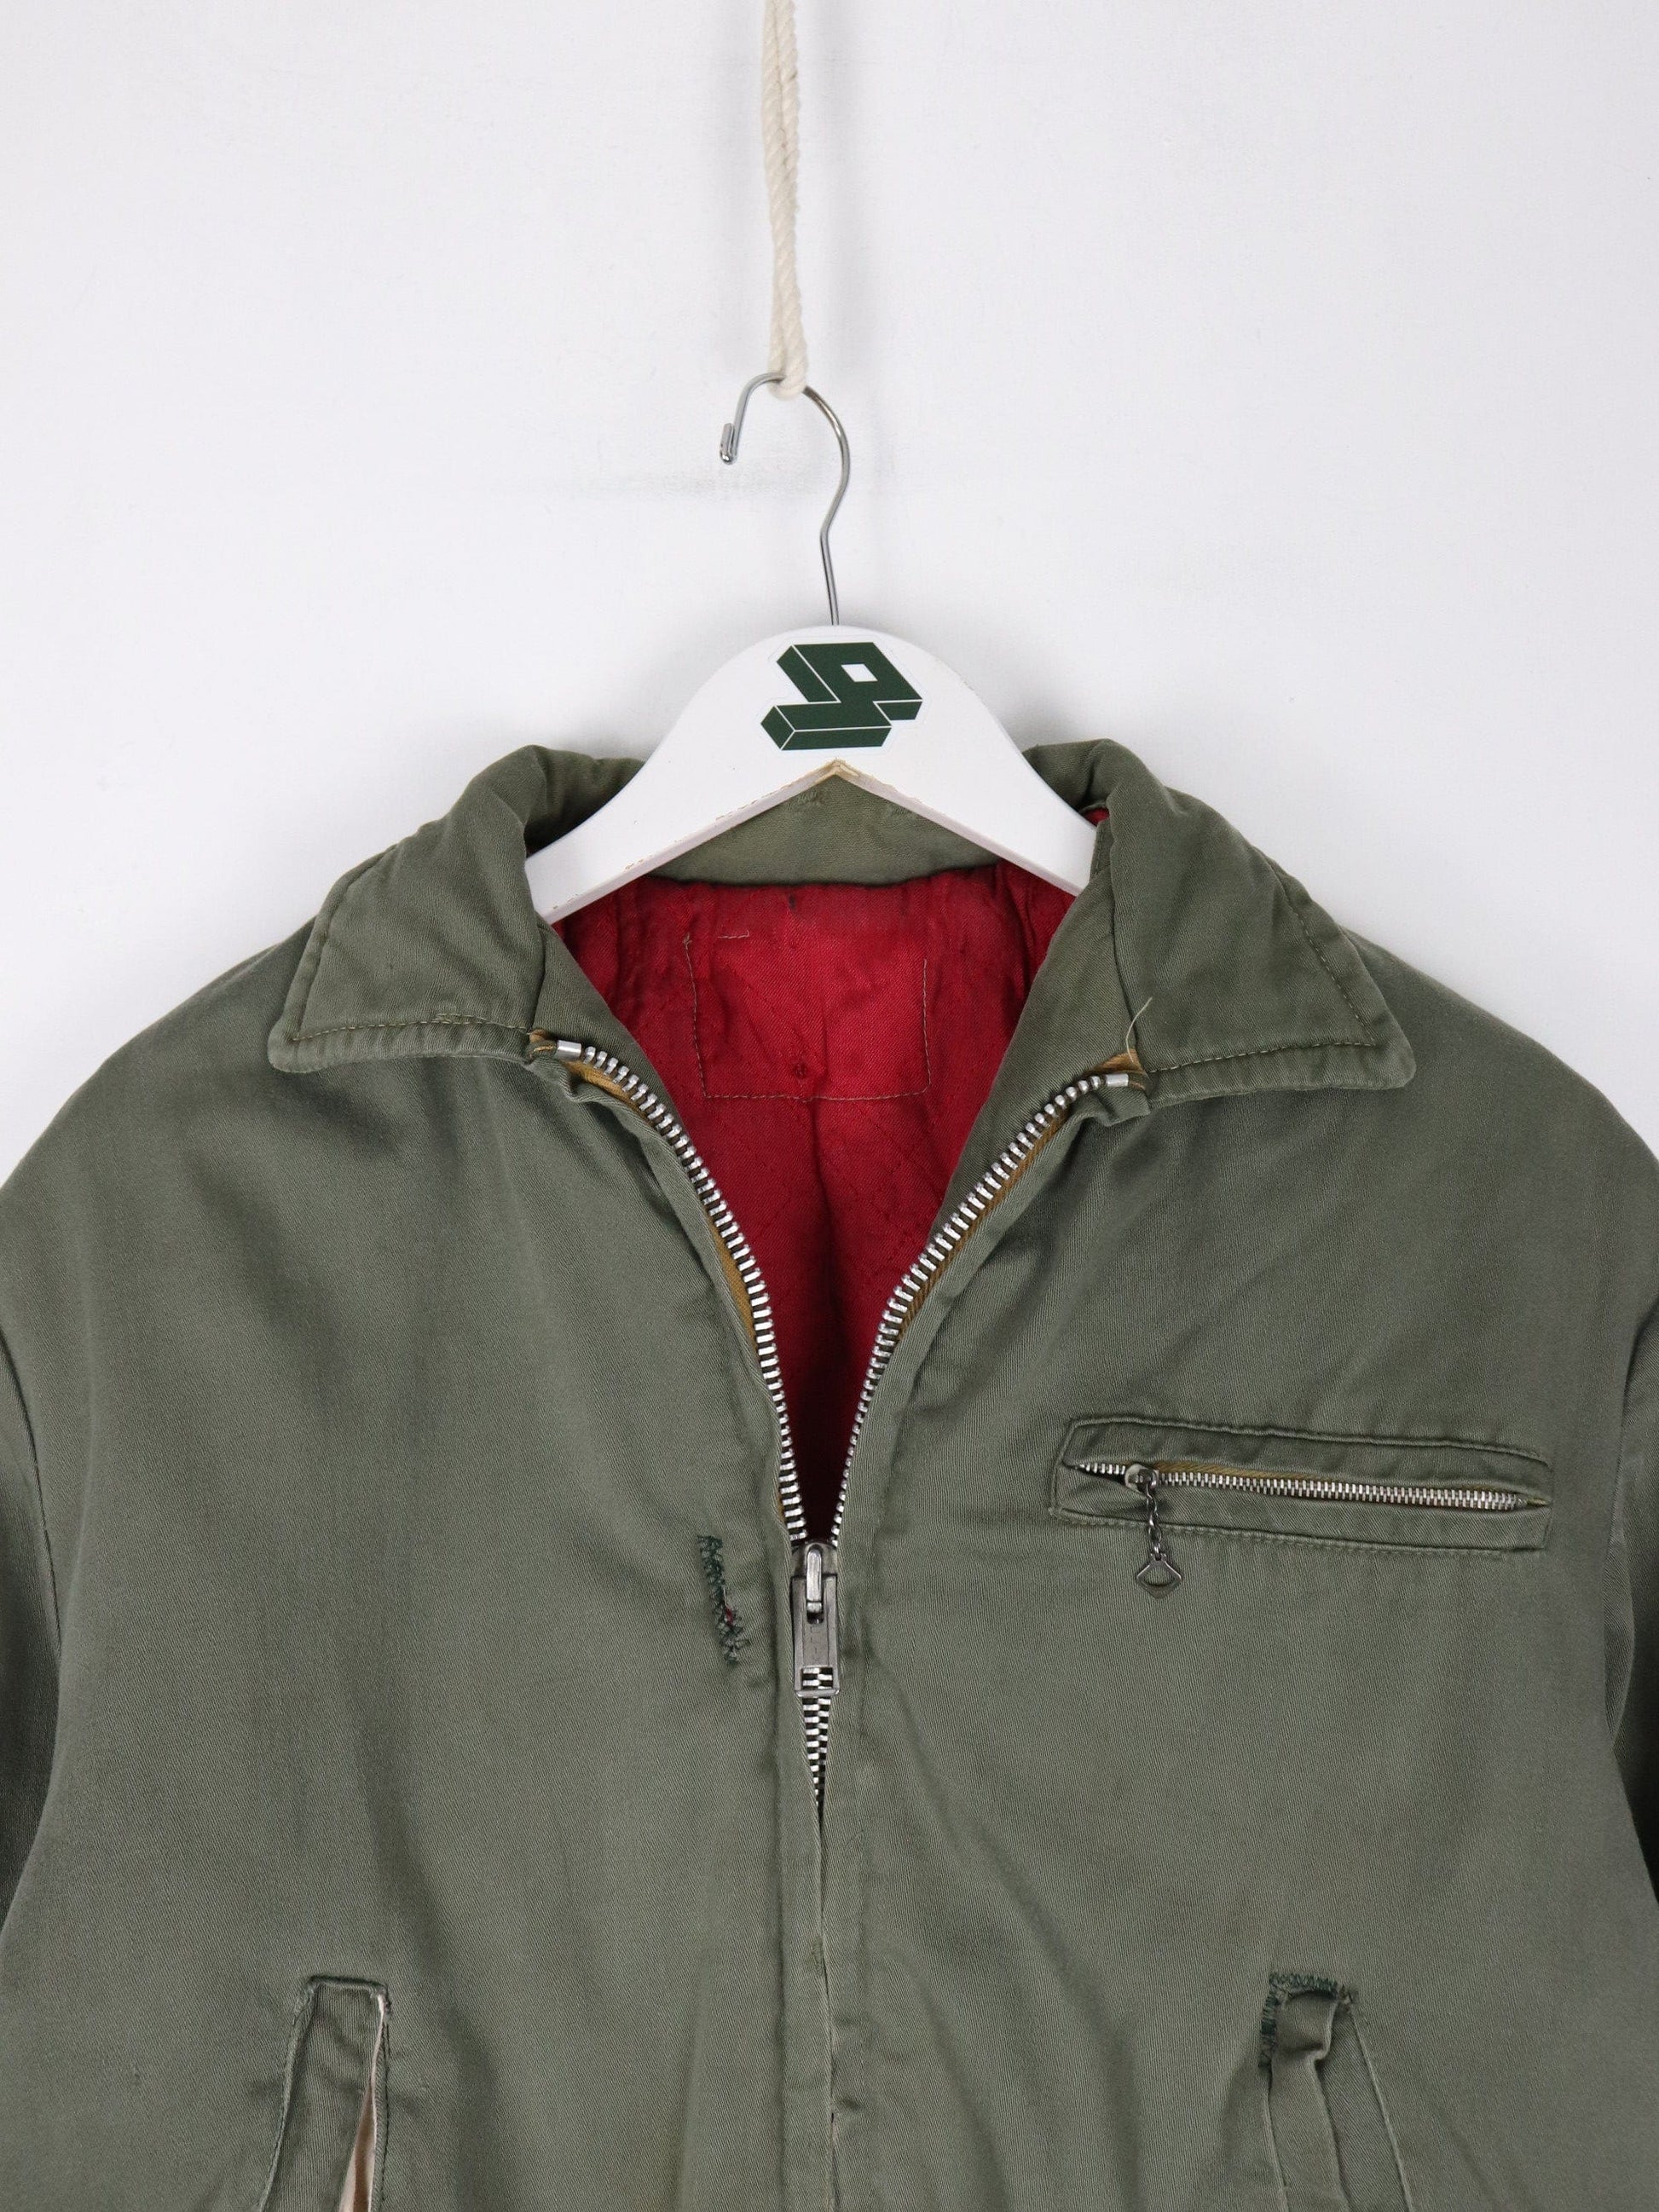 Other Jackets & Coats Vintage Military Jacket Mens Small Green Army Coat